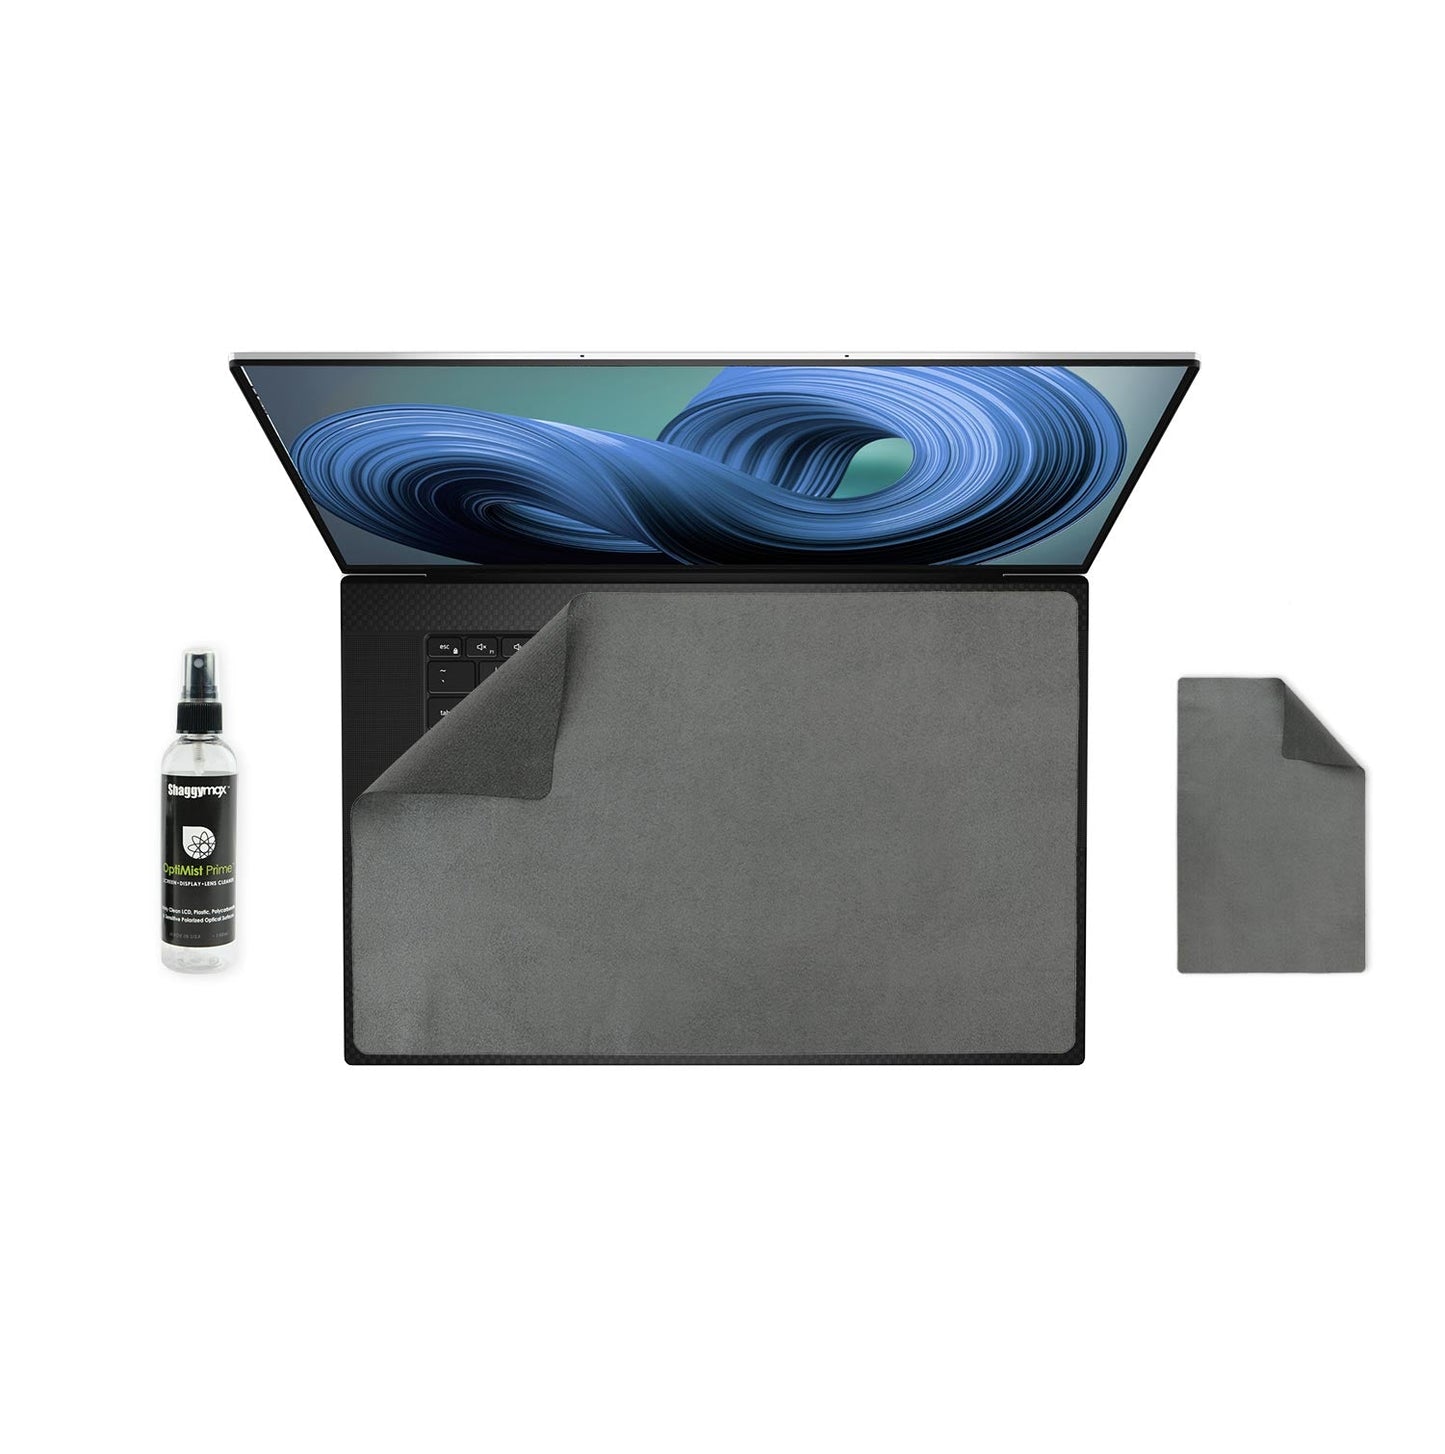 Dell XPS 17 Turbo Pac Microfiber Screen Protector Keyboard Cover & Cleaning Kit - ShaggyMax